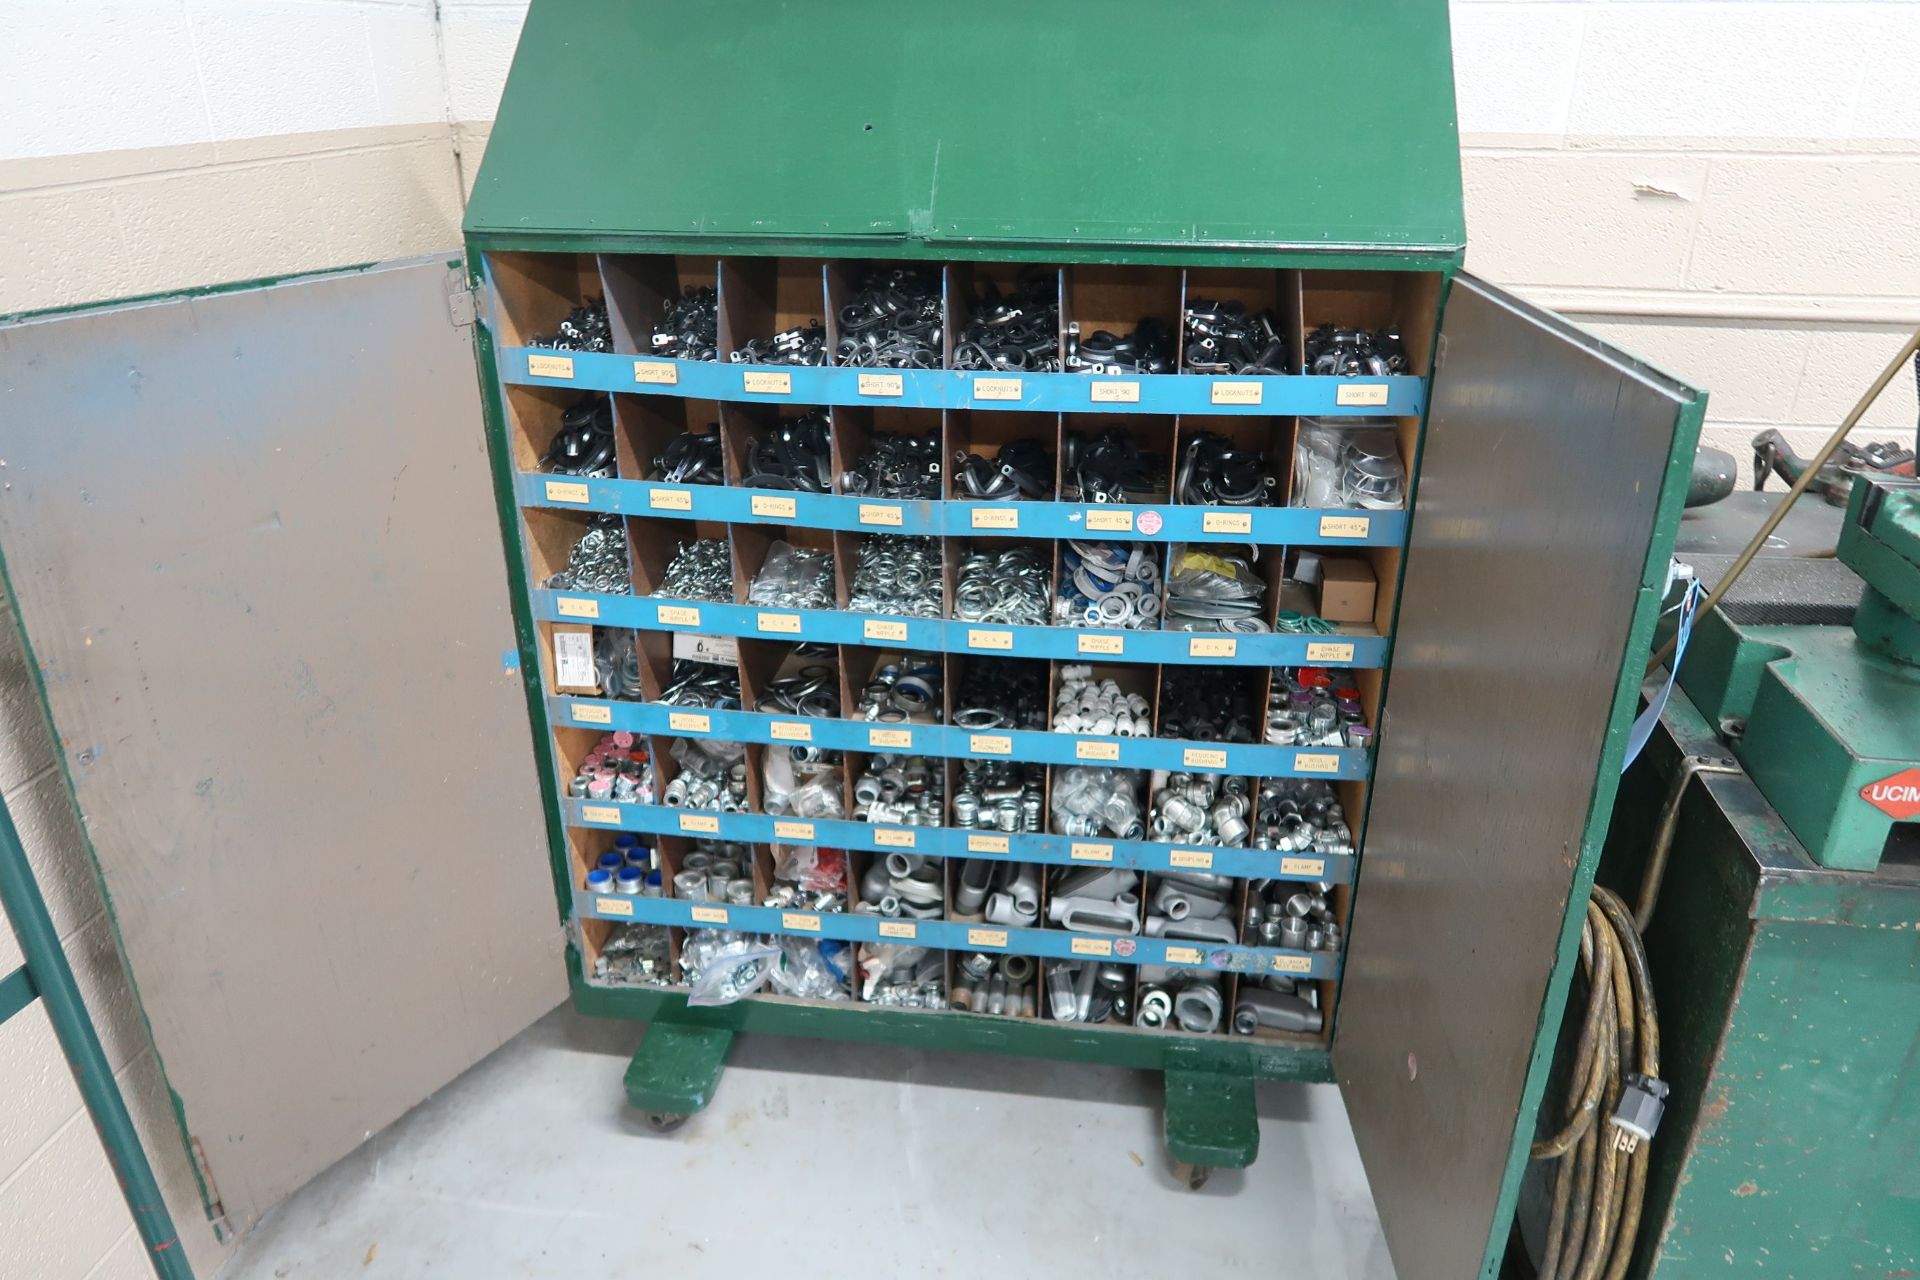 48" X 12" X 50' PORTABLE PIDGEON HOLE CABINET WITH MISCELLANEOUS ELECTRIC HARDWARE INCLUDING CLAMPS,